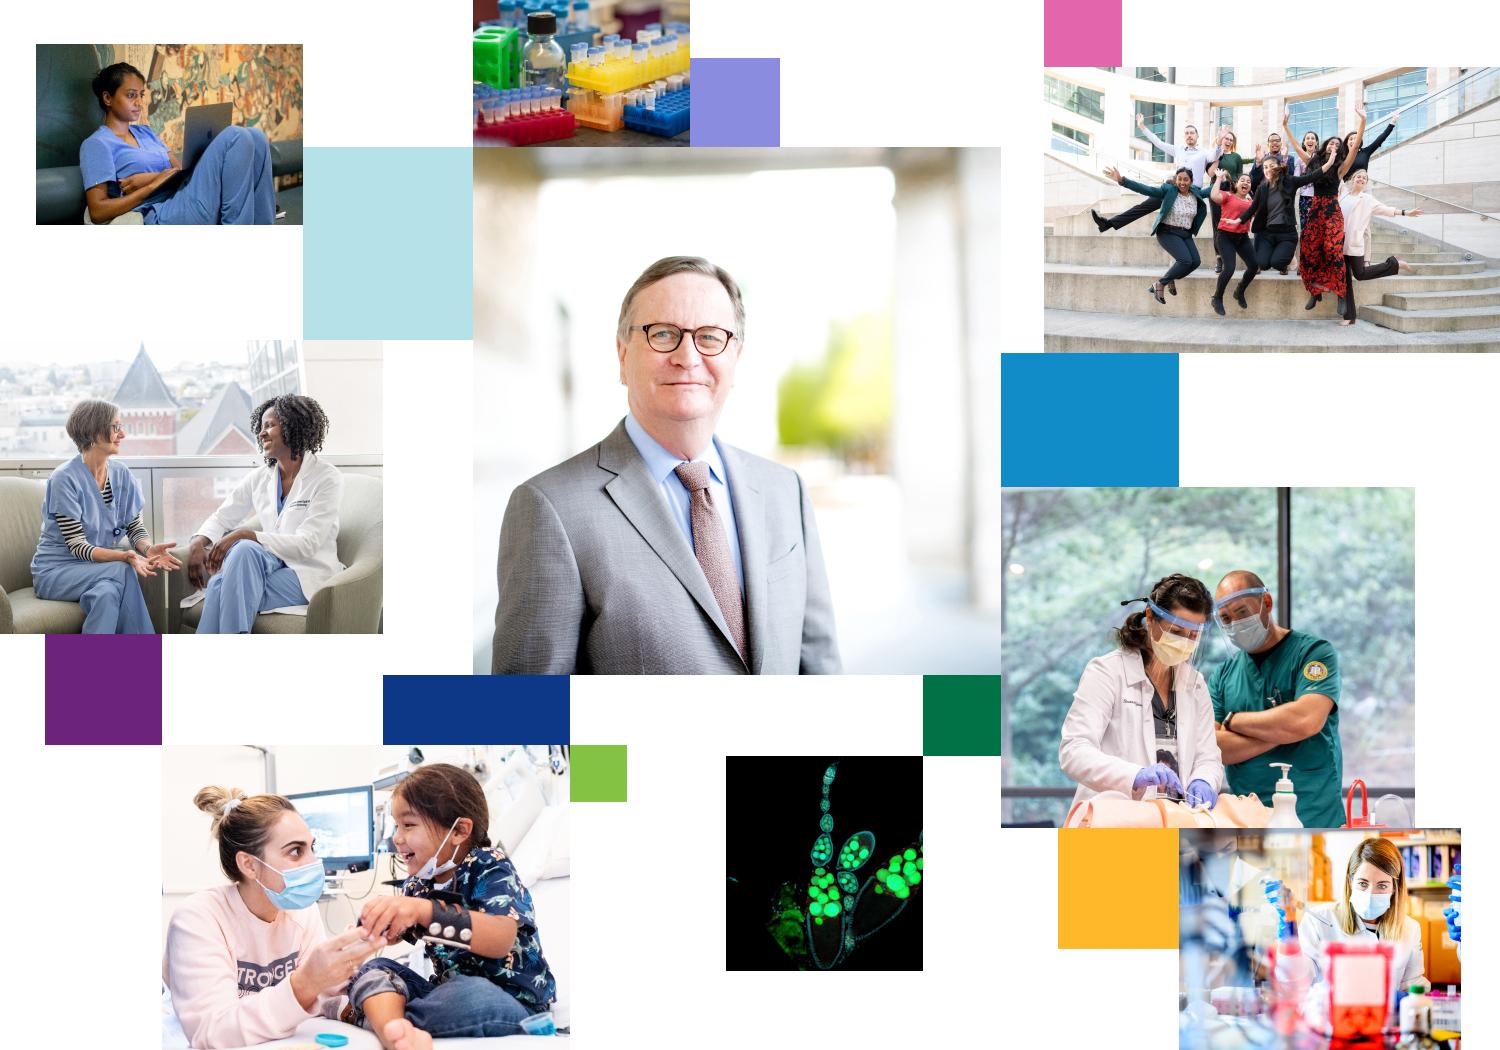 Chancellor collage highlighting health, education, and research